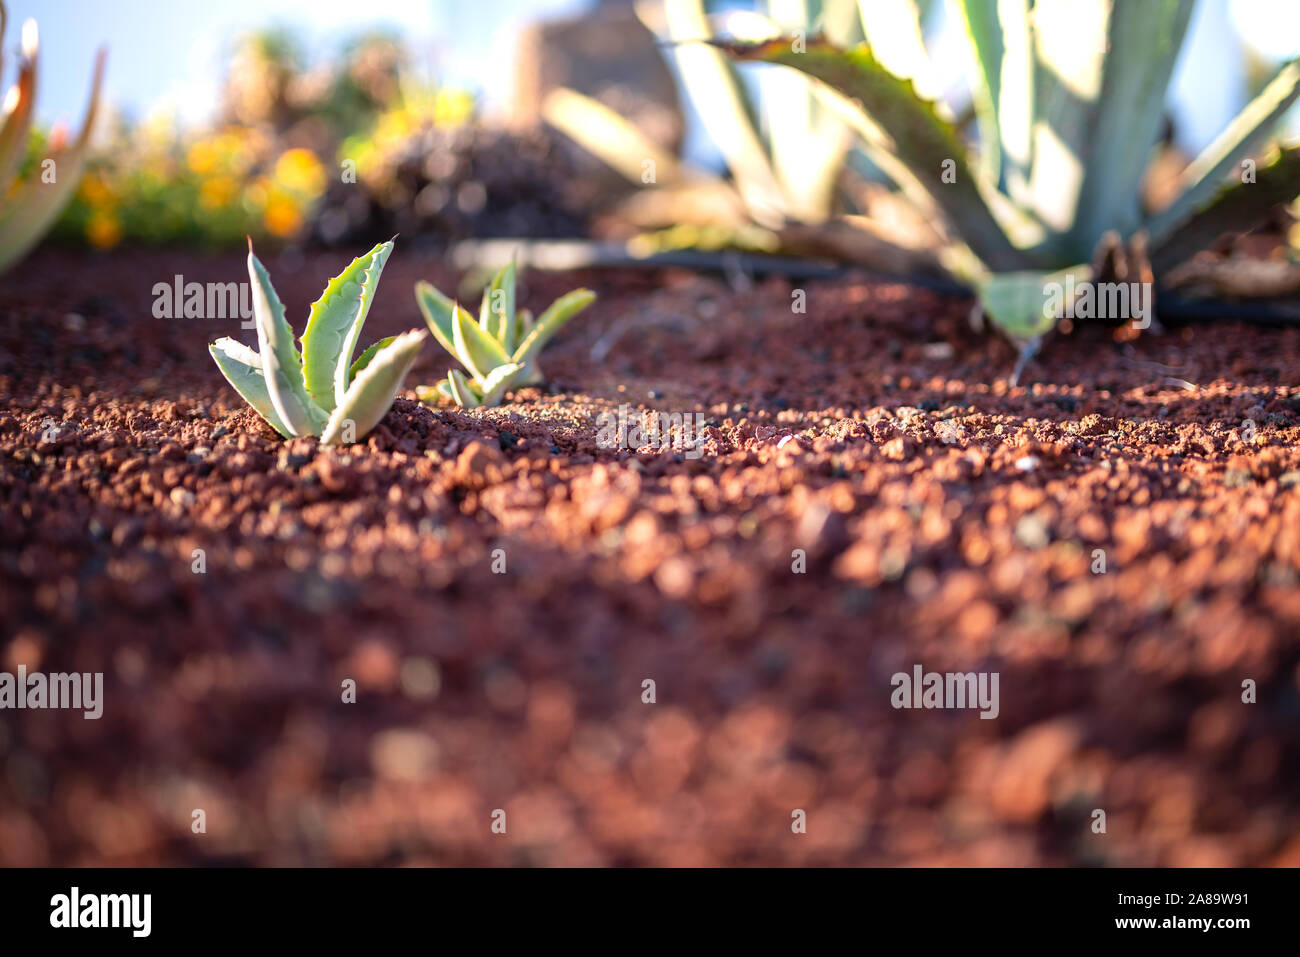 small green Aloe Vera plants growing on red volcanic soil Stock Photo